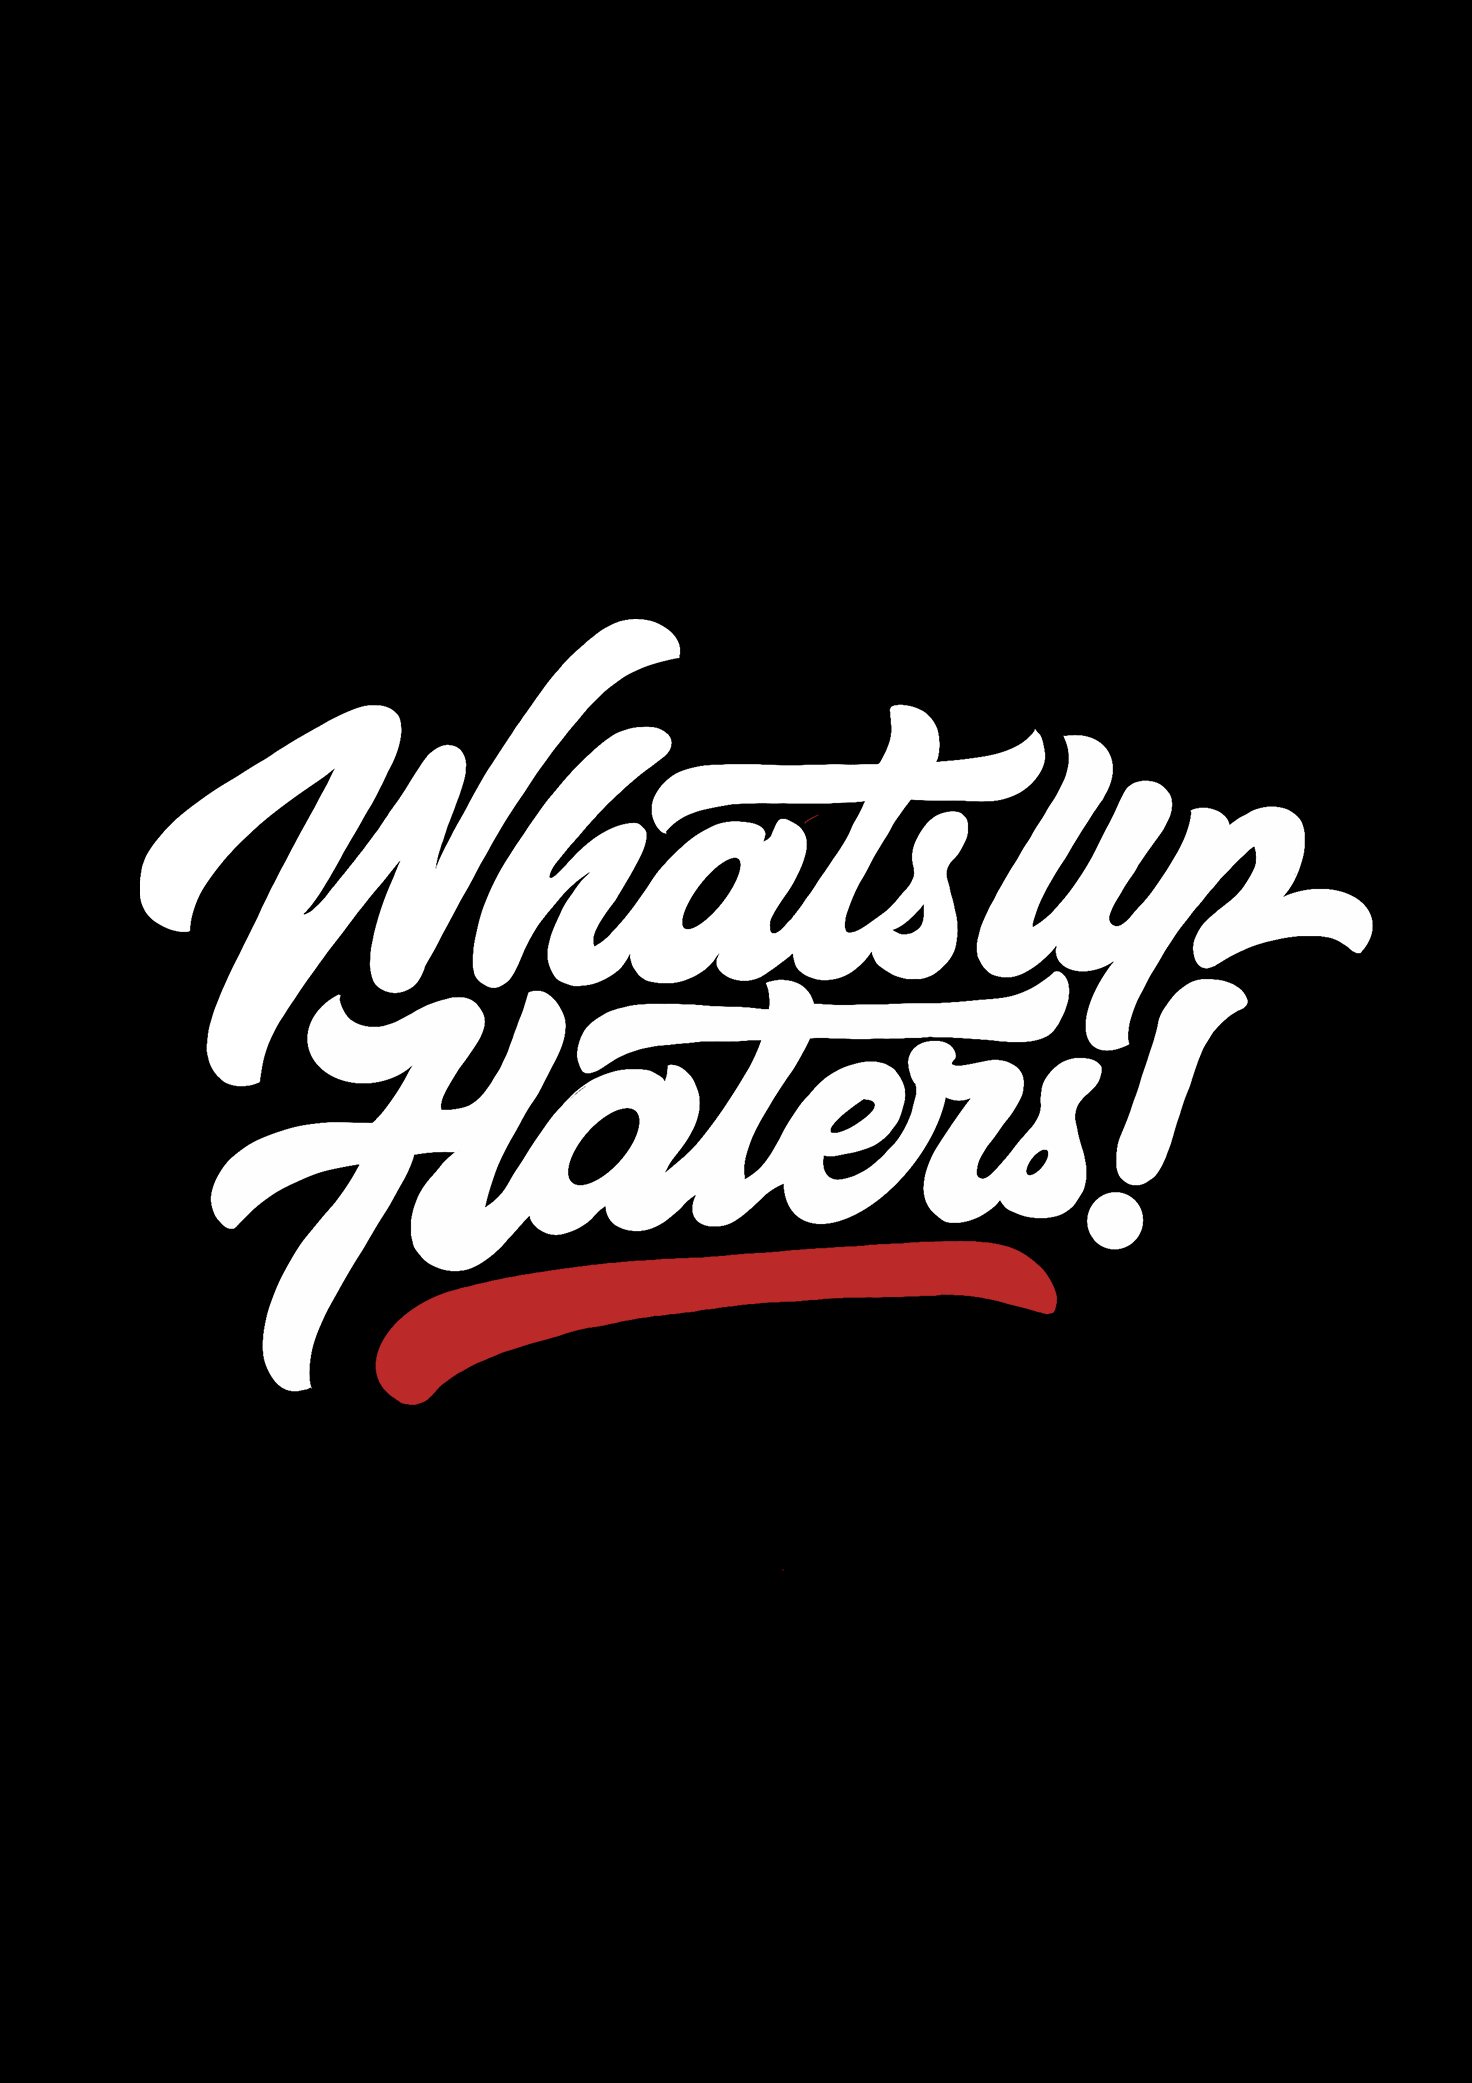 " WHAT'S UP HATERS " - UNISEX HALF-SLEEVE T-SHIRTS